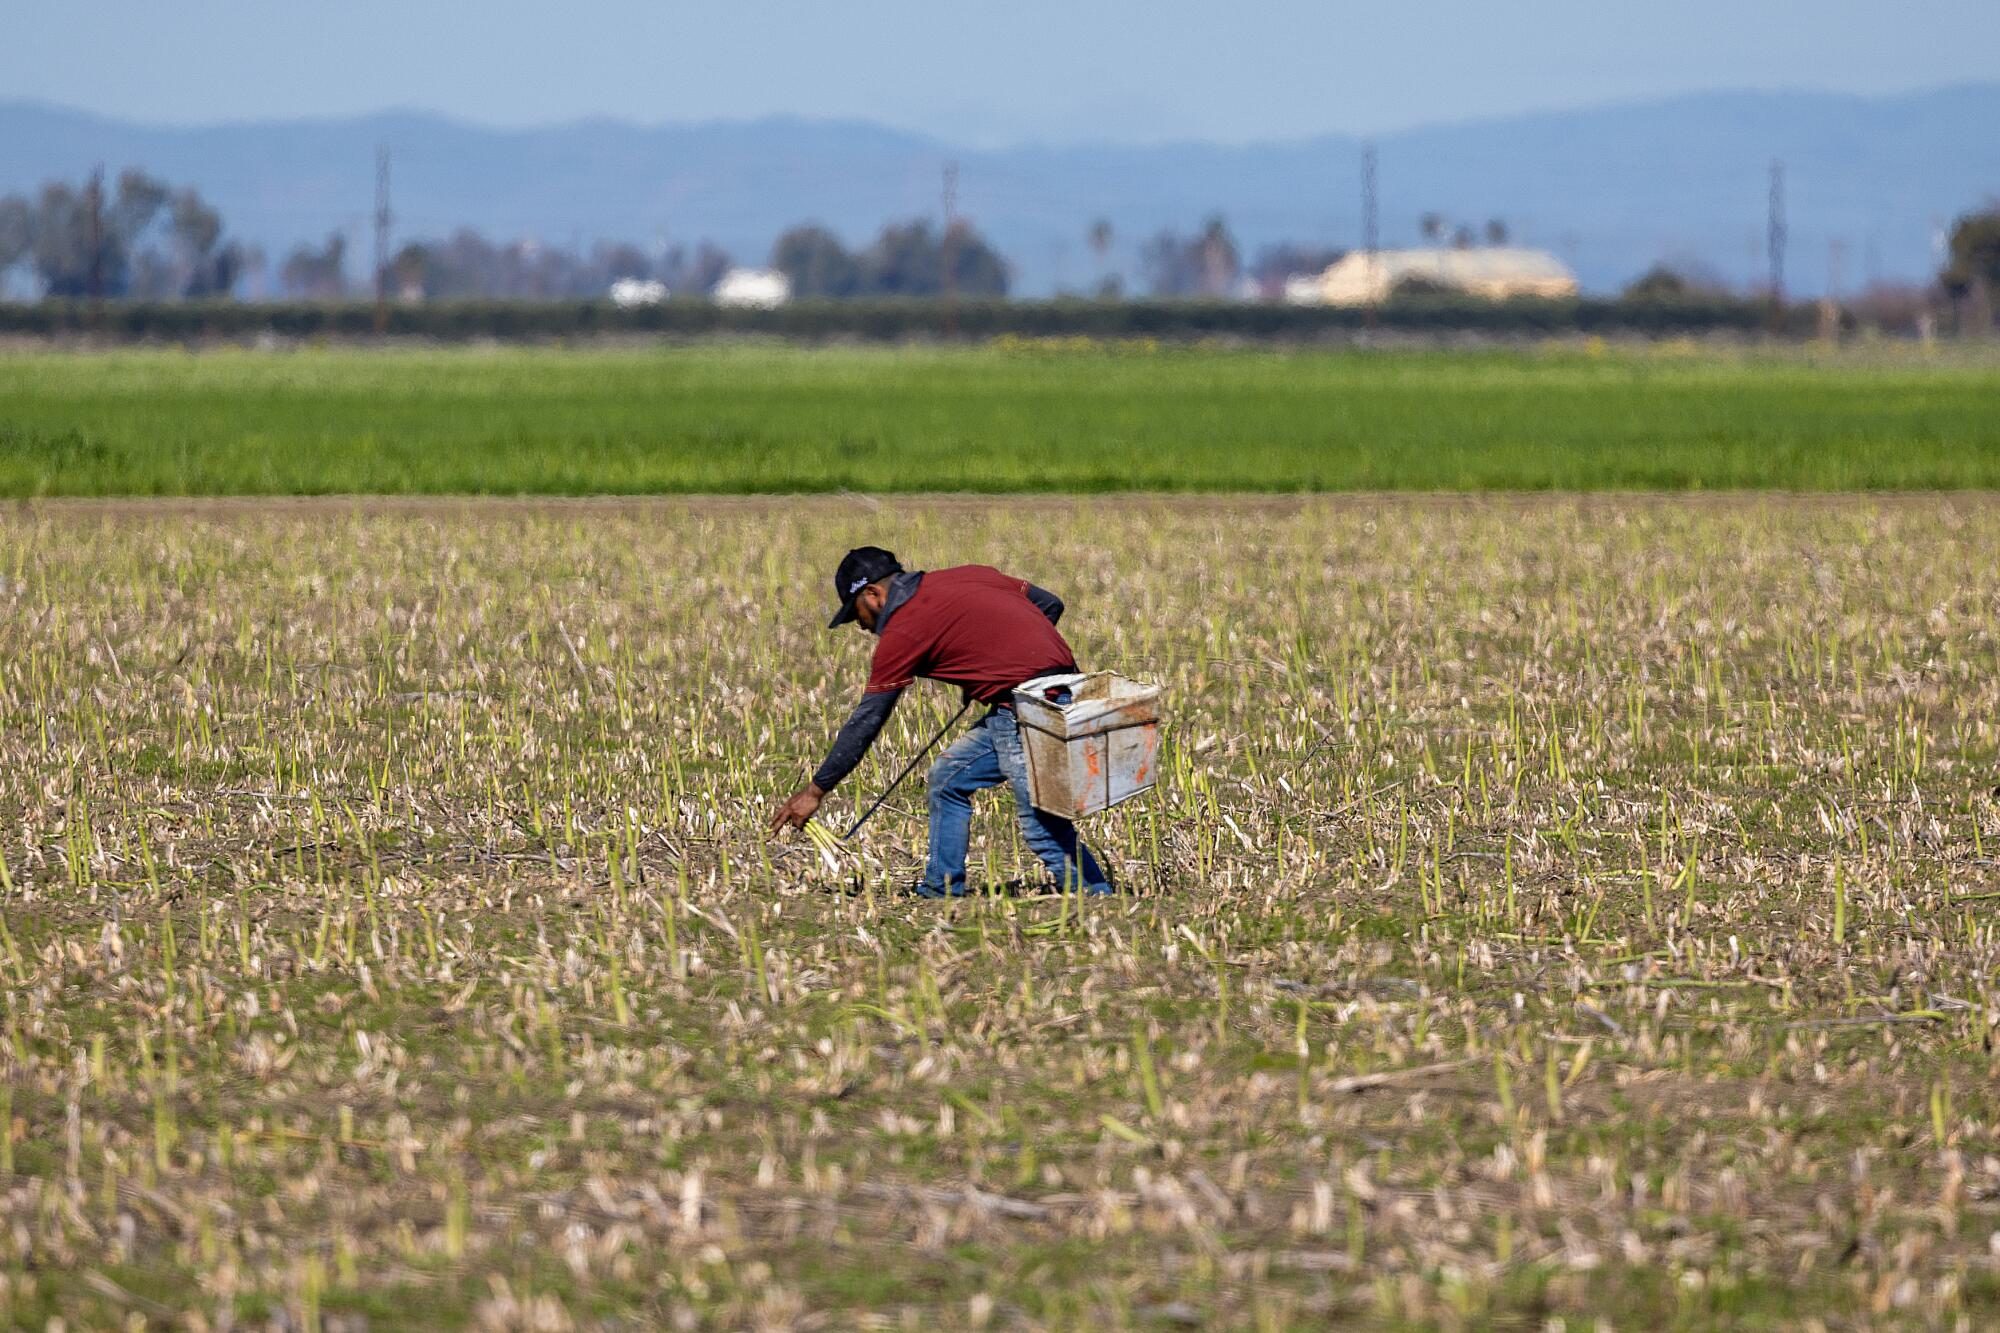 A worker harvests asparagus in a farm field.